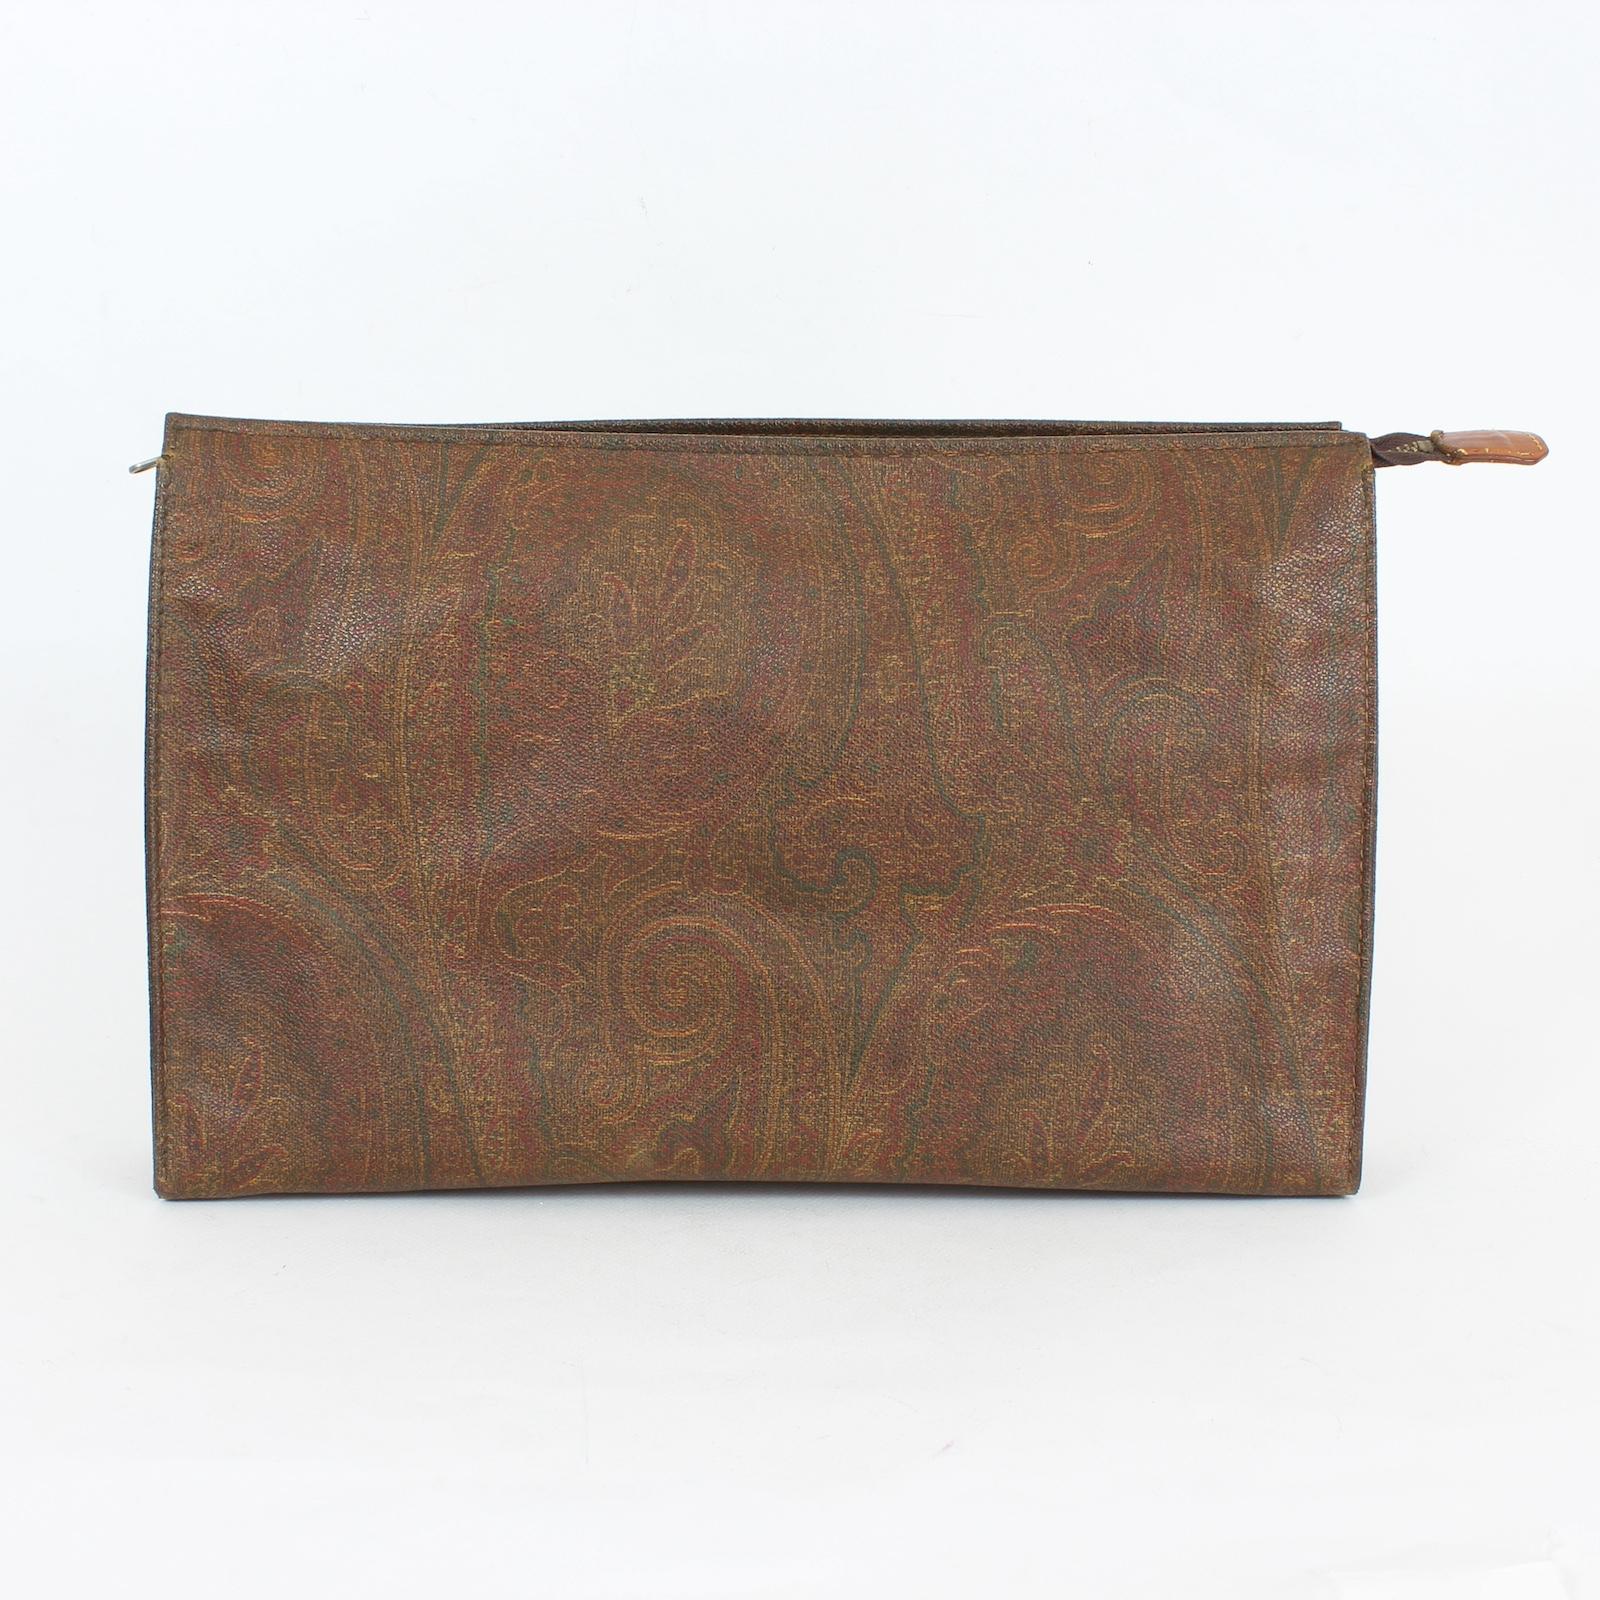 Etro clutch bag vintage 90s. Brown handbag with typical paisley pattern. Rigid canvas fabric zip closure. Made in Italy. The dust bag is present. The bag is in excellent condition on the outside, but on the inside it is a little cracked.

Height: 25